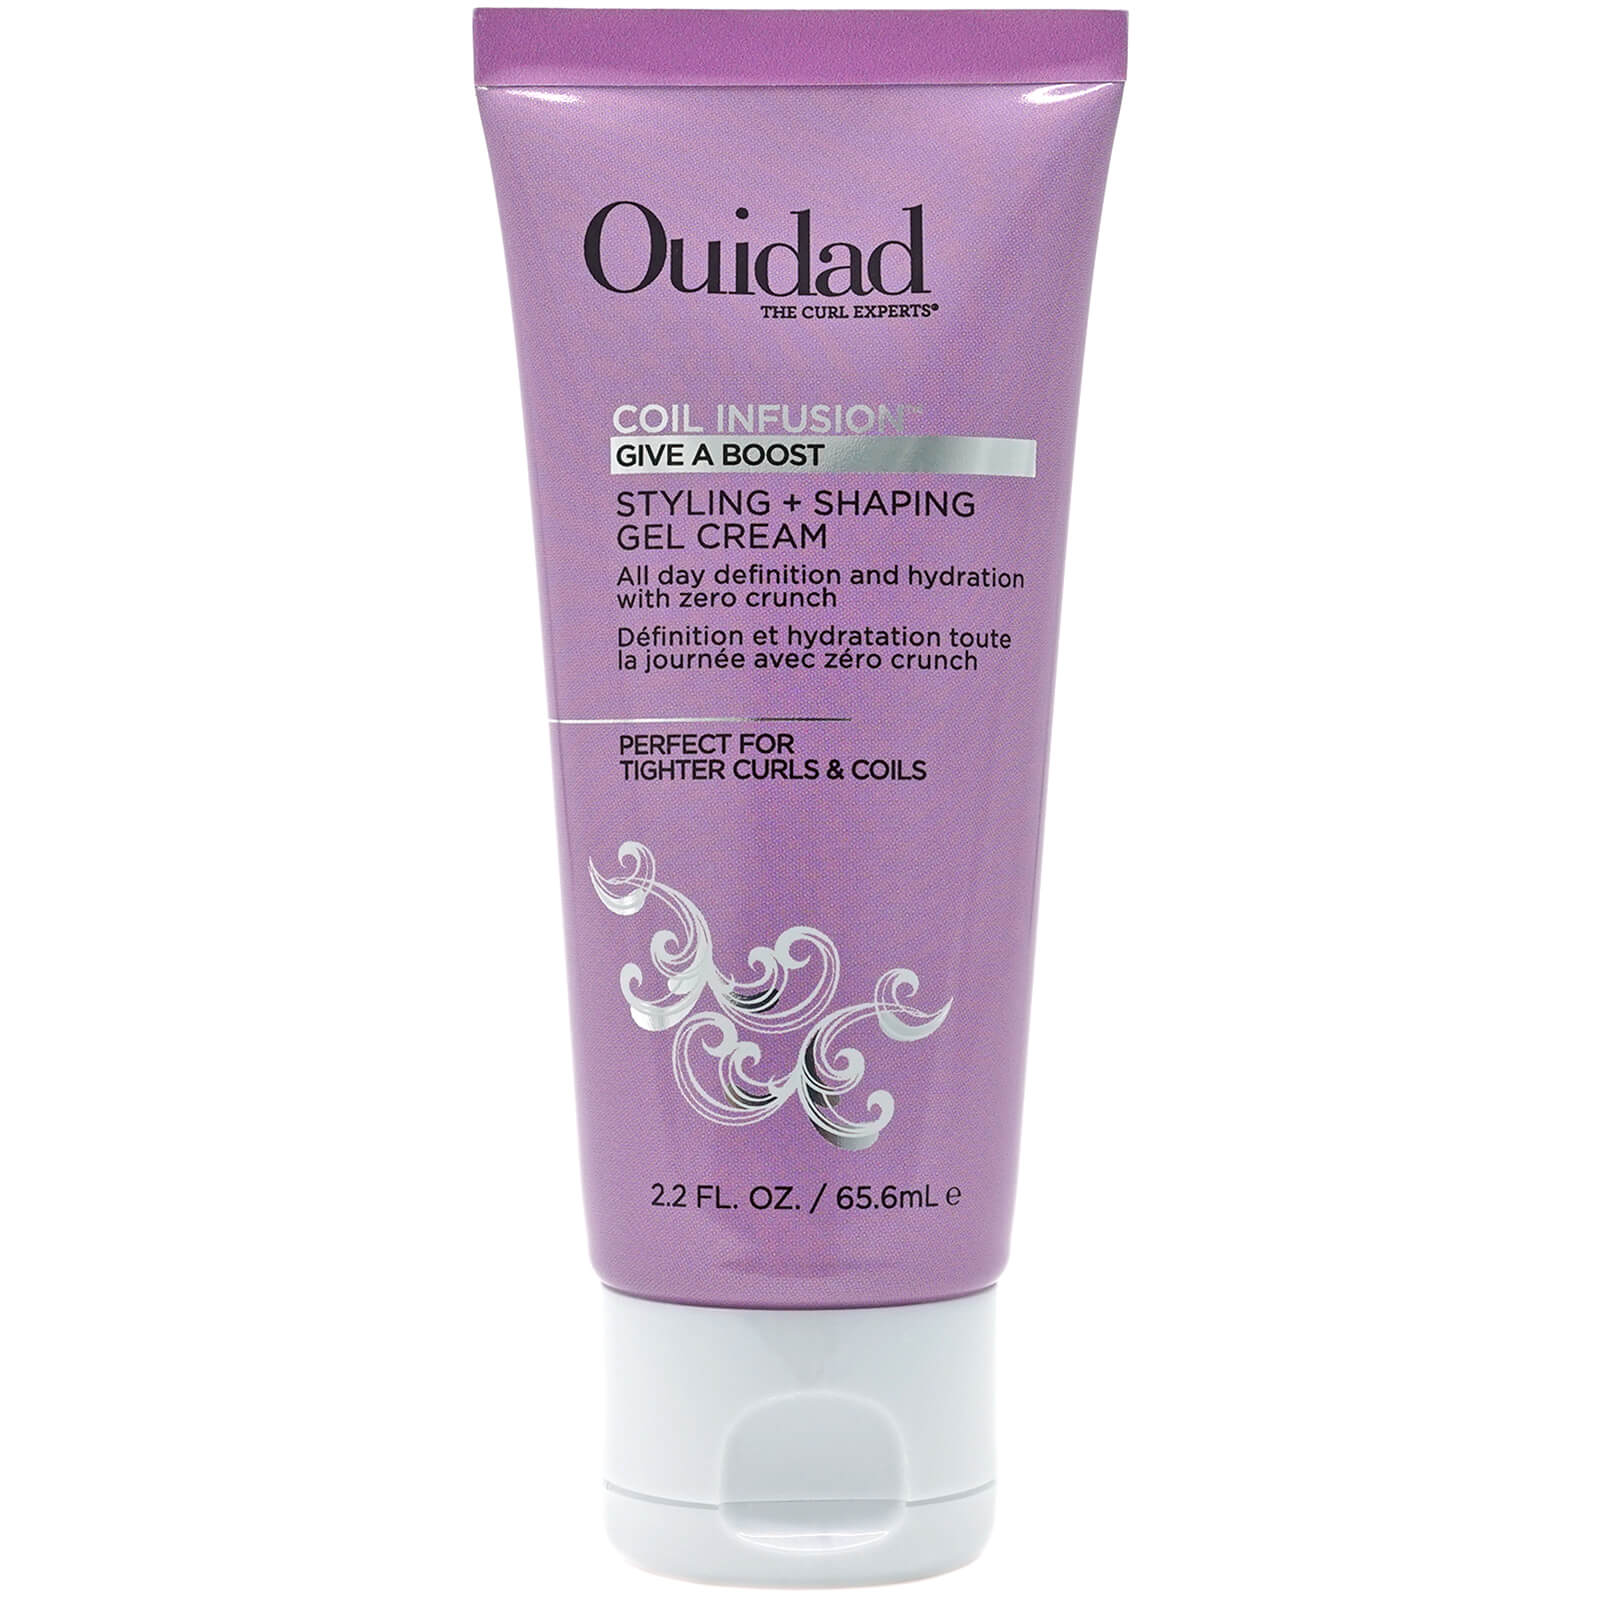 Ouidad Coil Infusion Give A Boost Styling And Shaping Gel Cream 2.2 oz